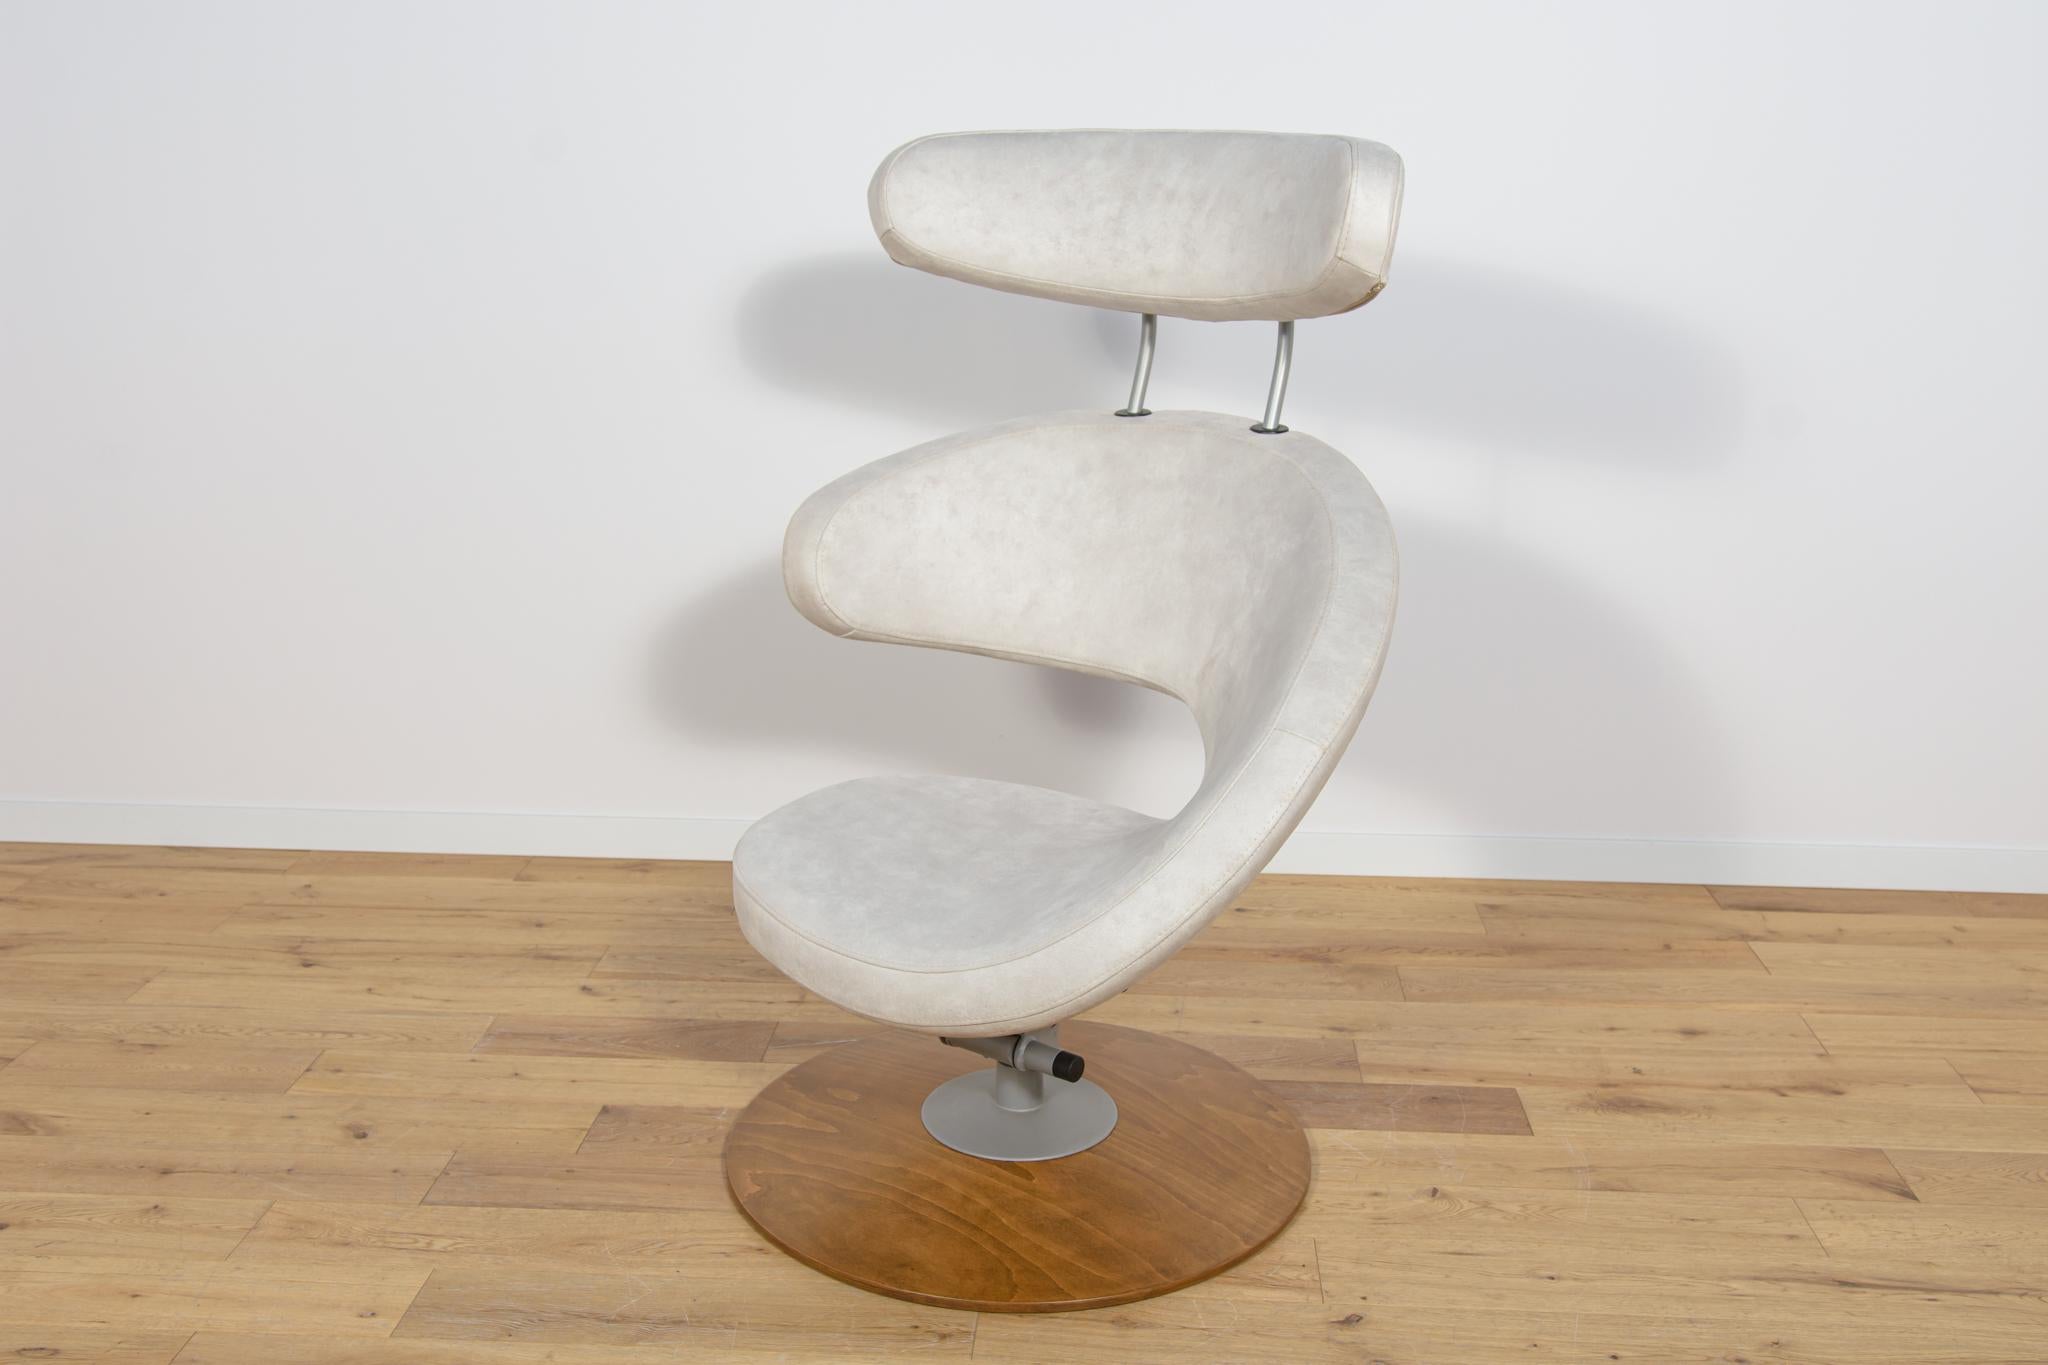 Contemporary Ergonomic Lounge Chair Model Peel with Ottoman by Olav Eldoy for Stokke, 2000s. For Sale